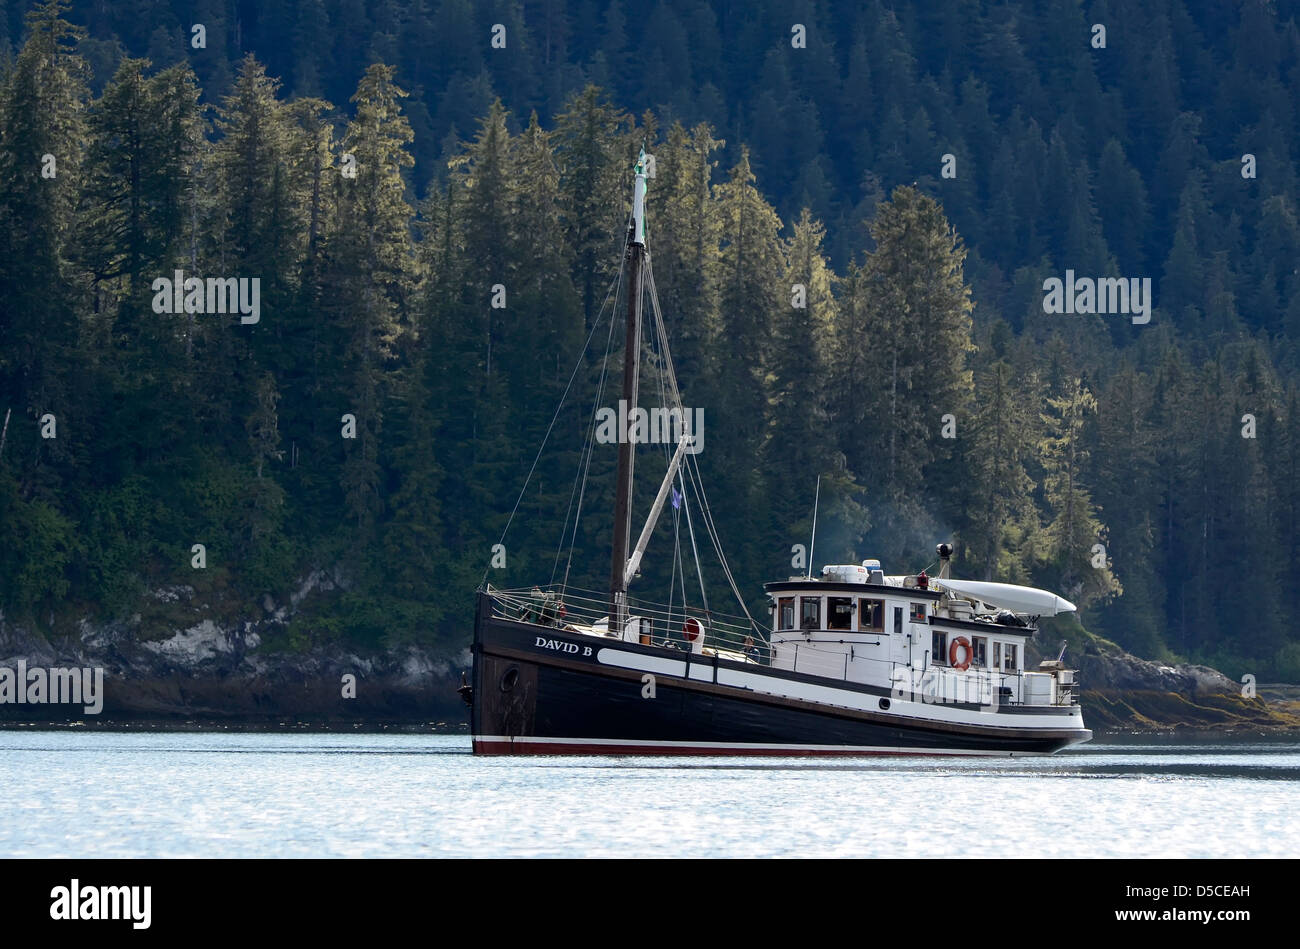 The David B, a restored boat used for cruising tours, Alaska. Stock Photo